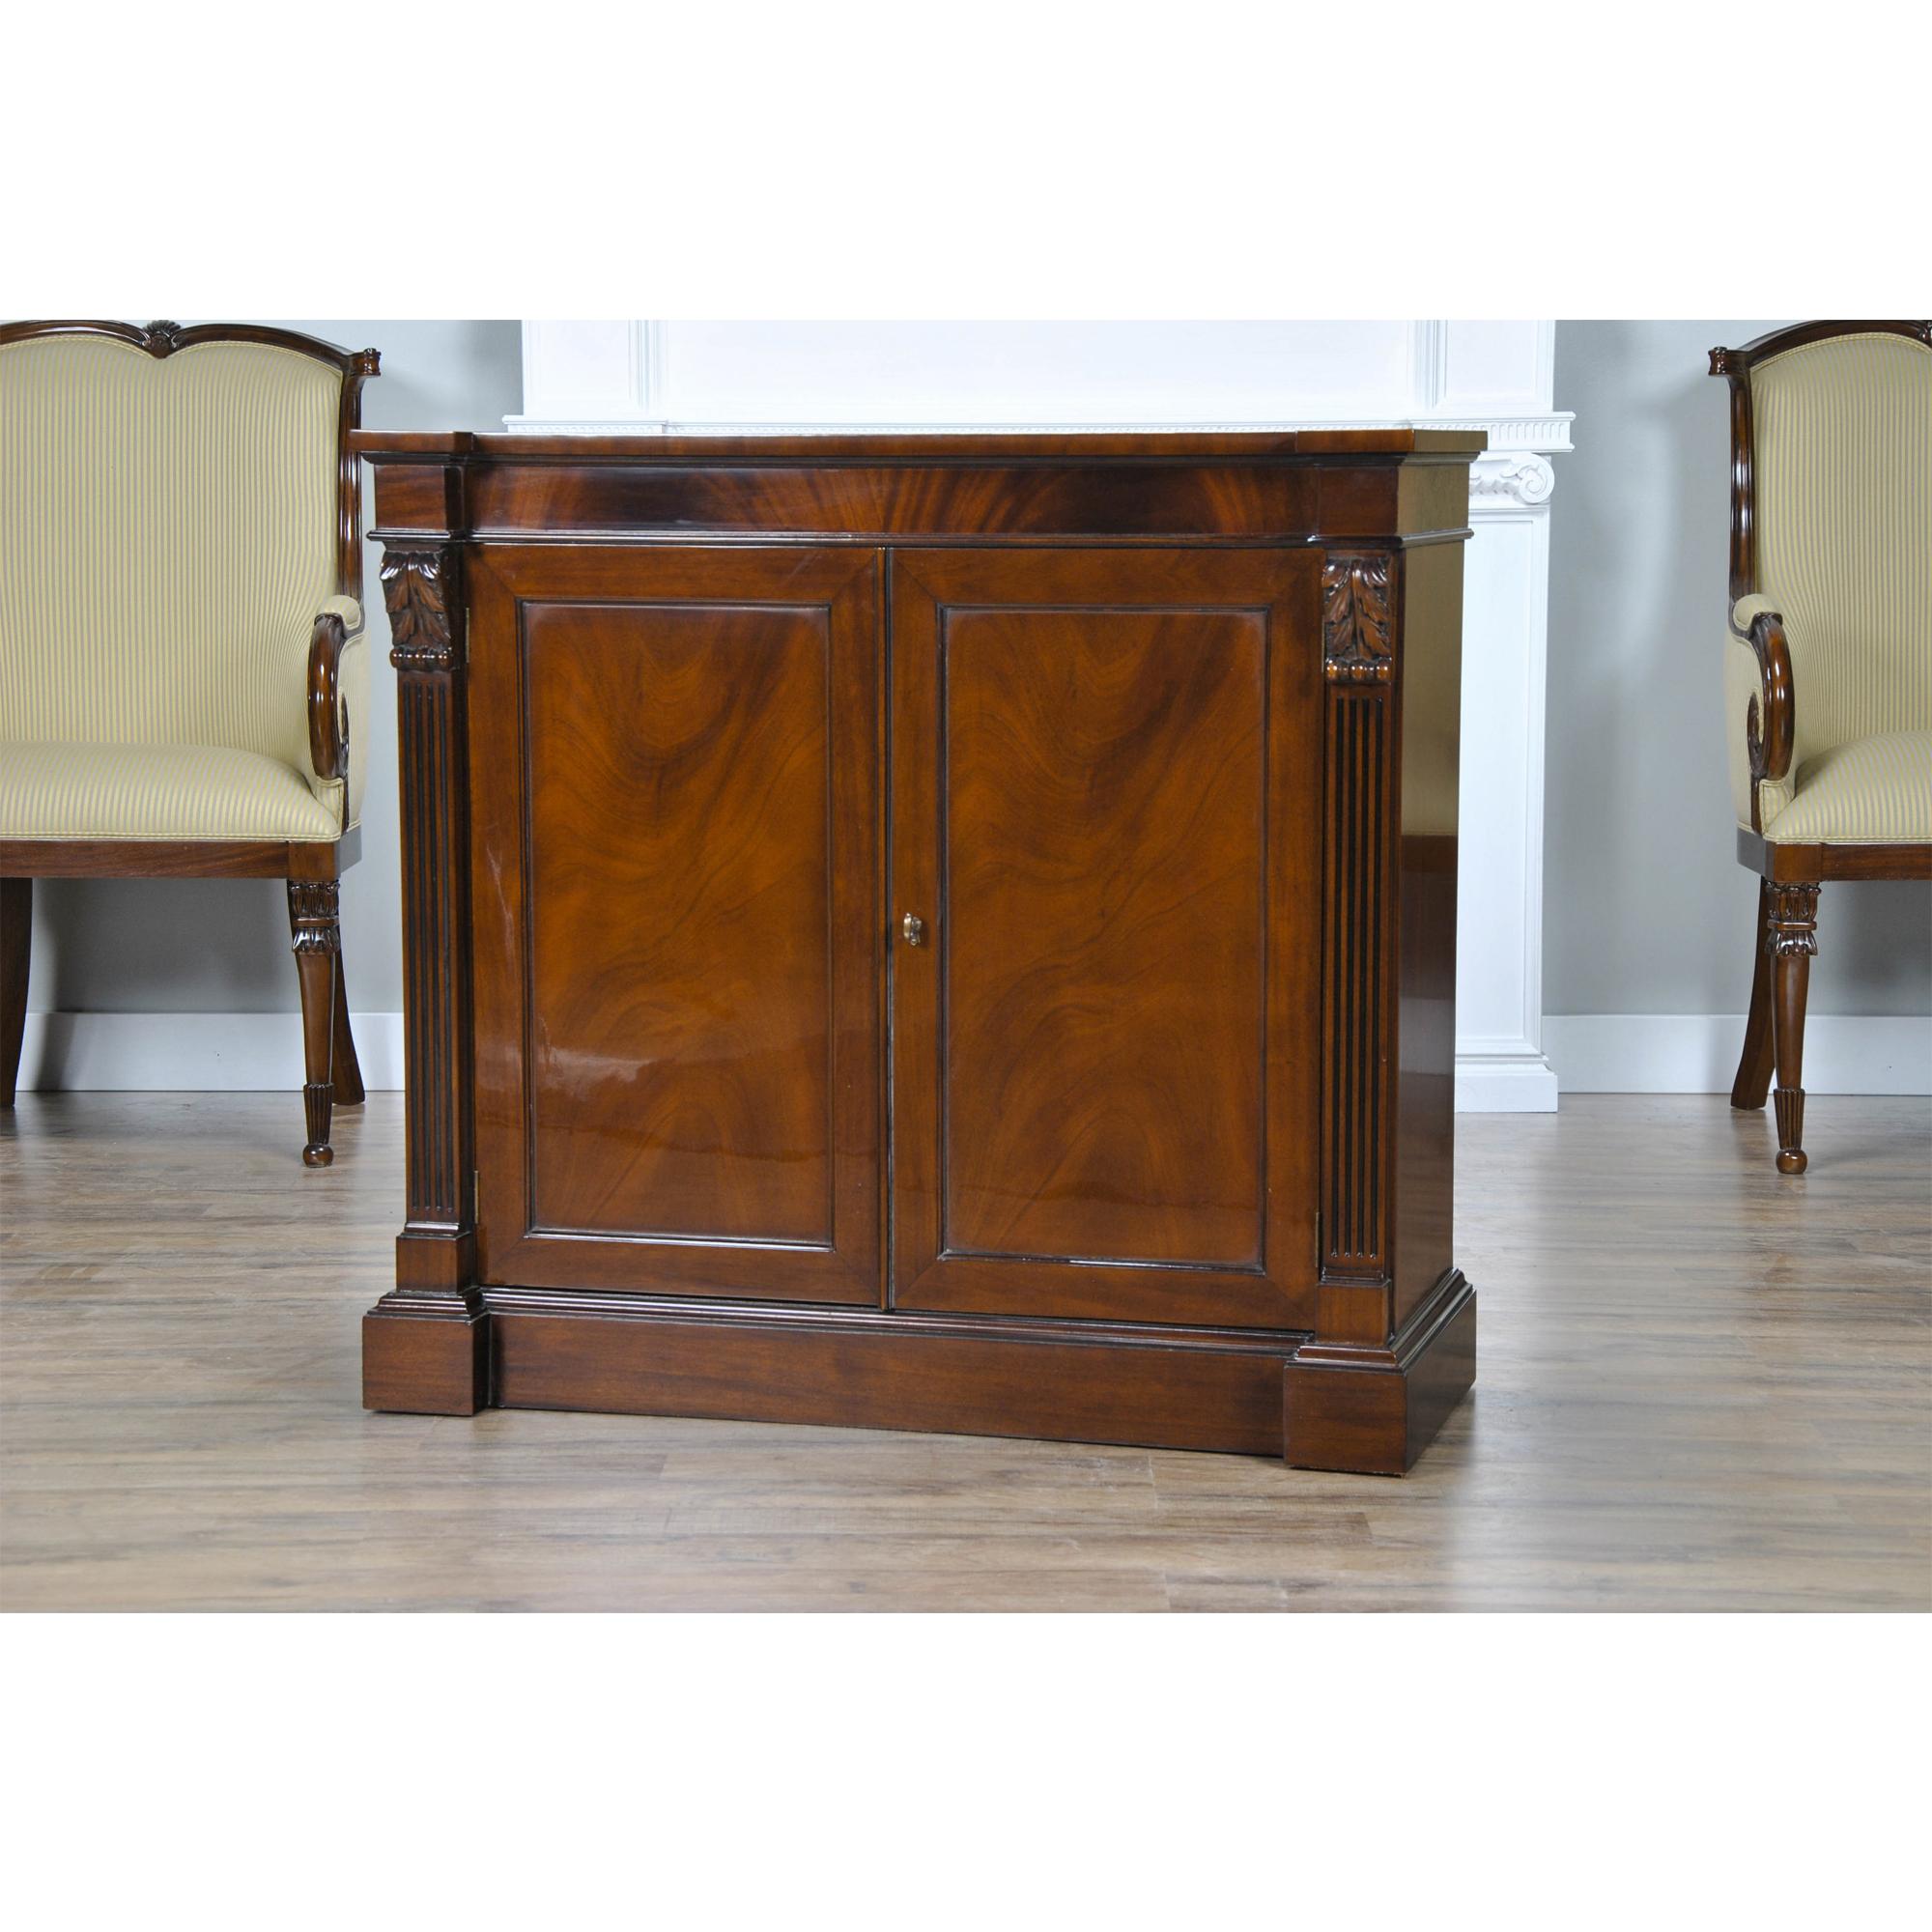 The Mahogany Server matches other items in our Penhurst collection. An ideal size our Mahogany Server can fit into tight spaces while still providing a lot of storage space. The two doors conceal a storage area with a shelf to help store anything